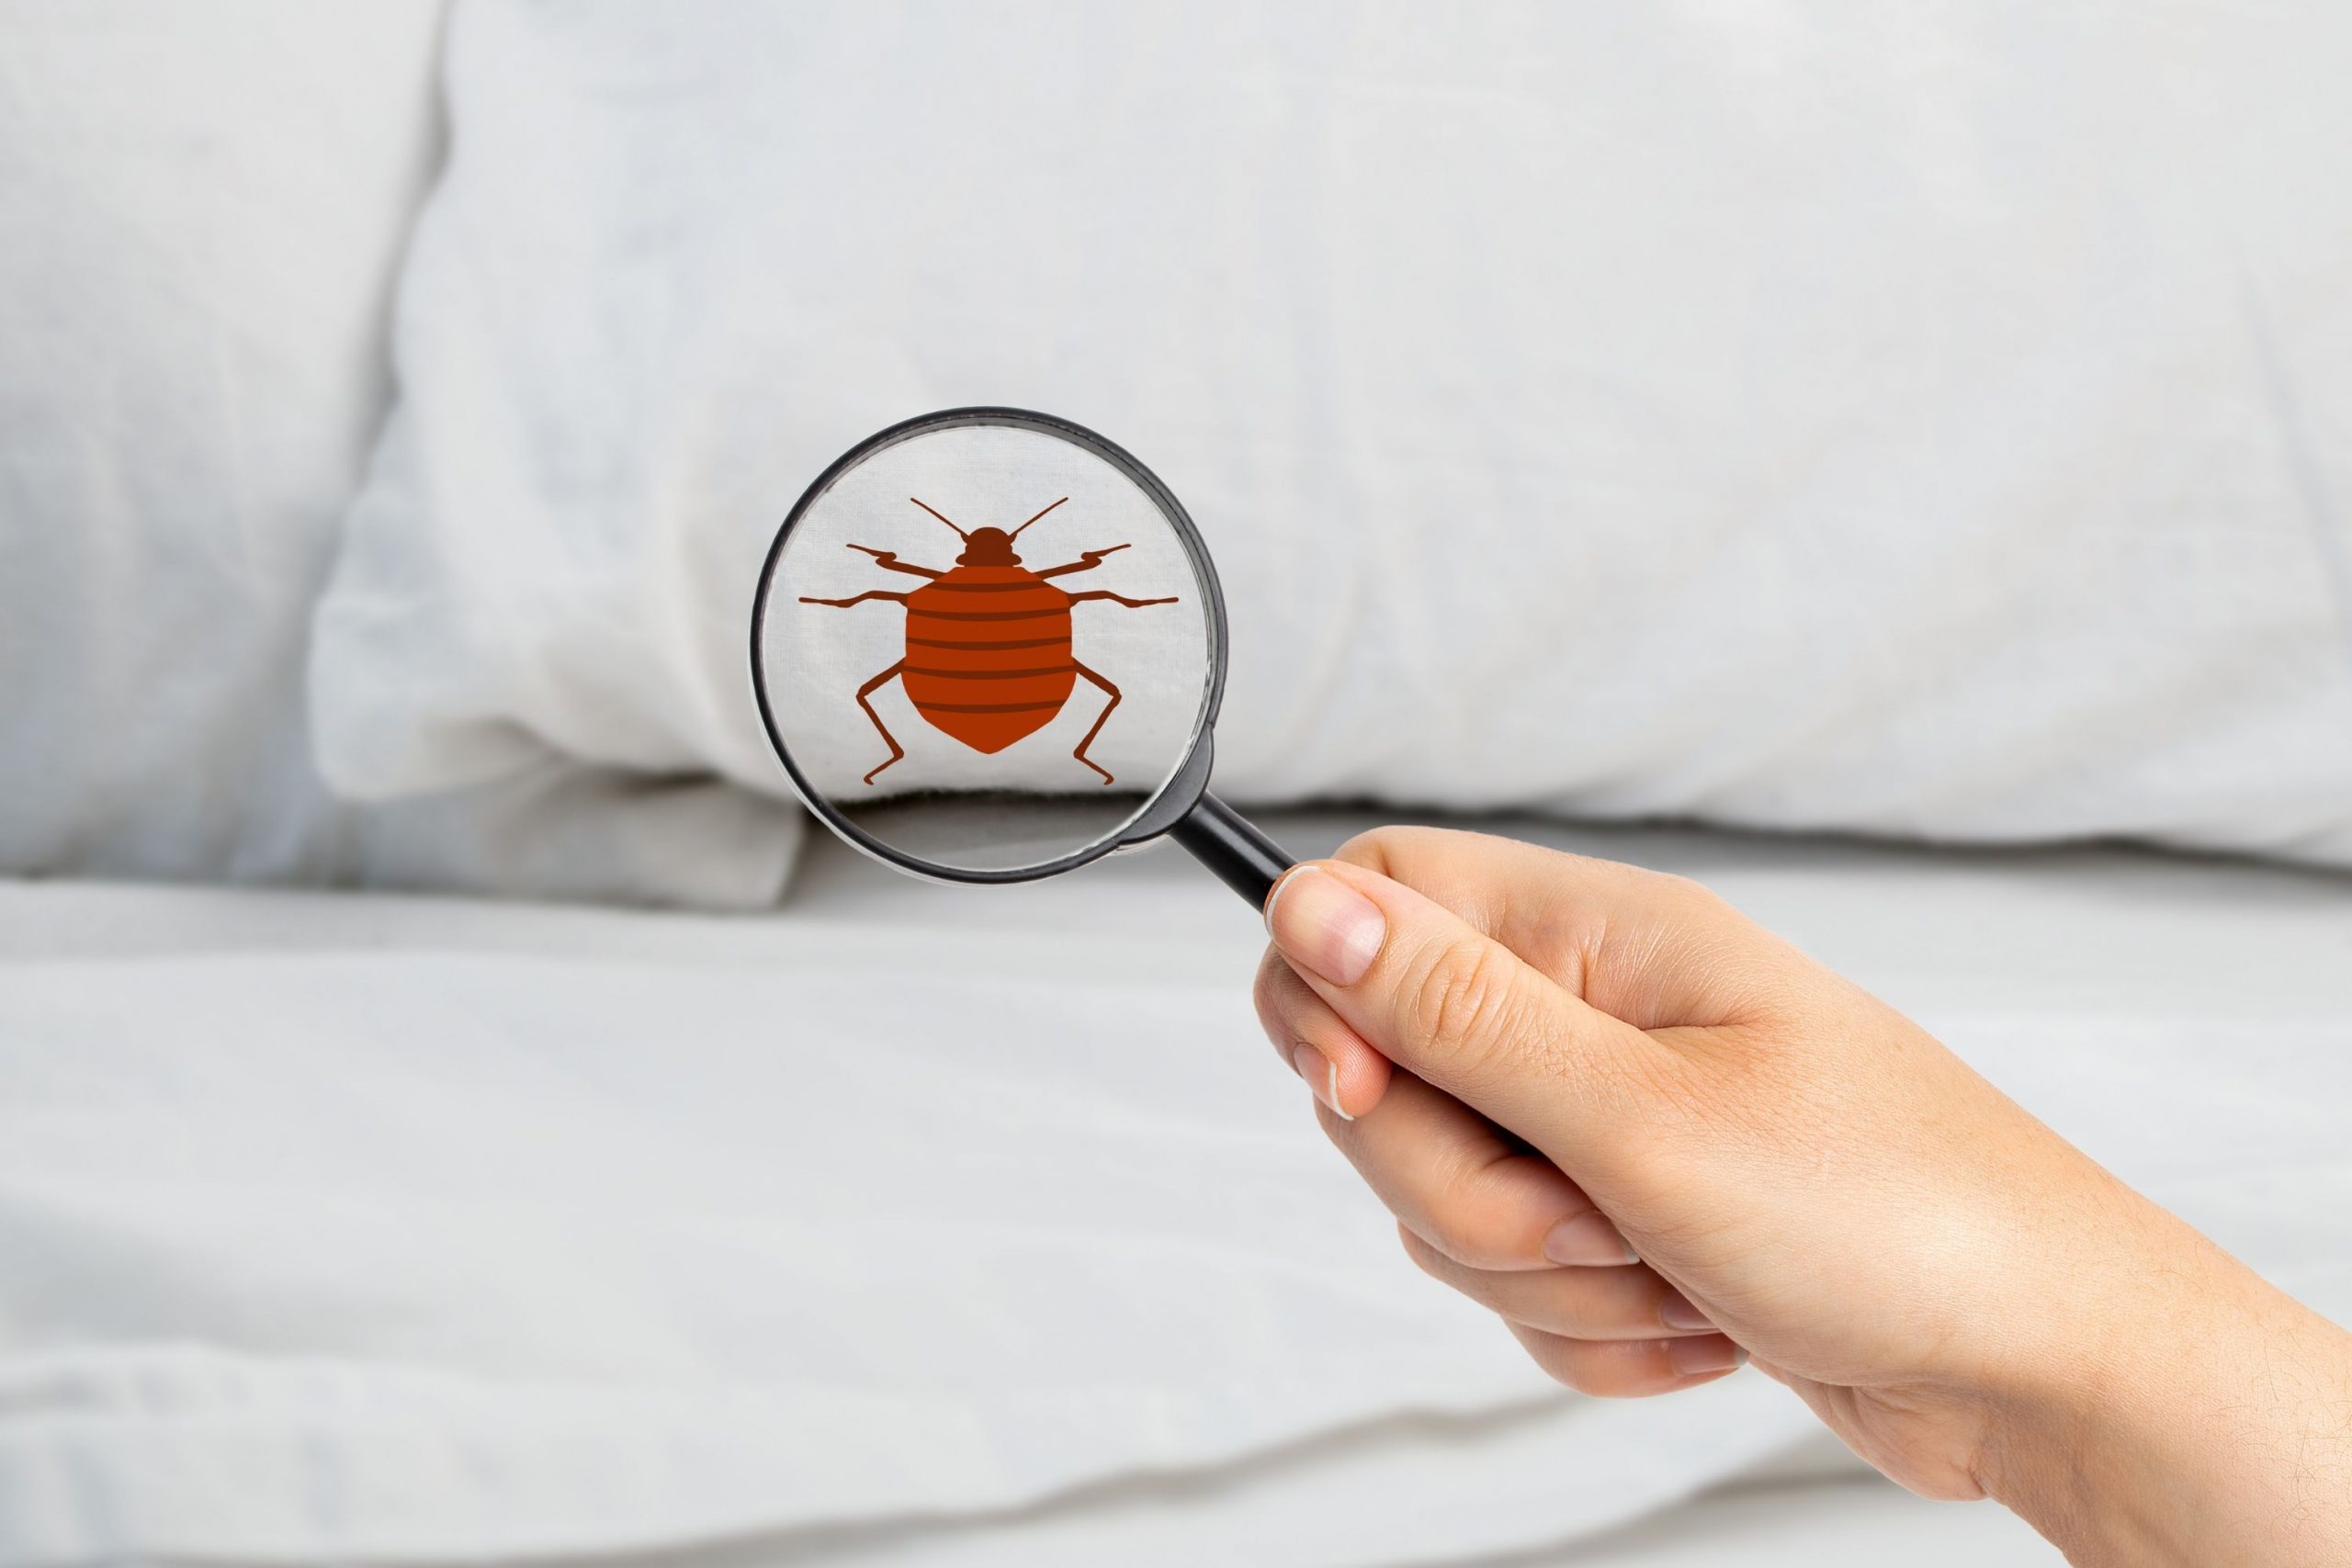 How to Find Bed Bugs Eggs During the Day